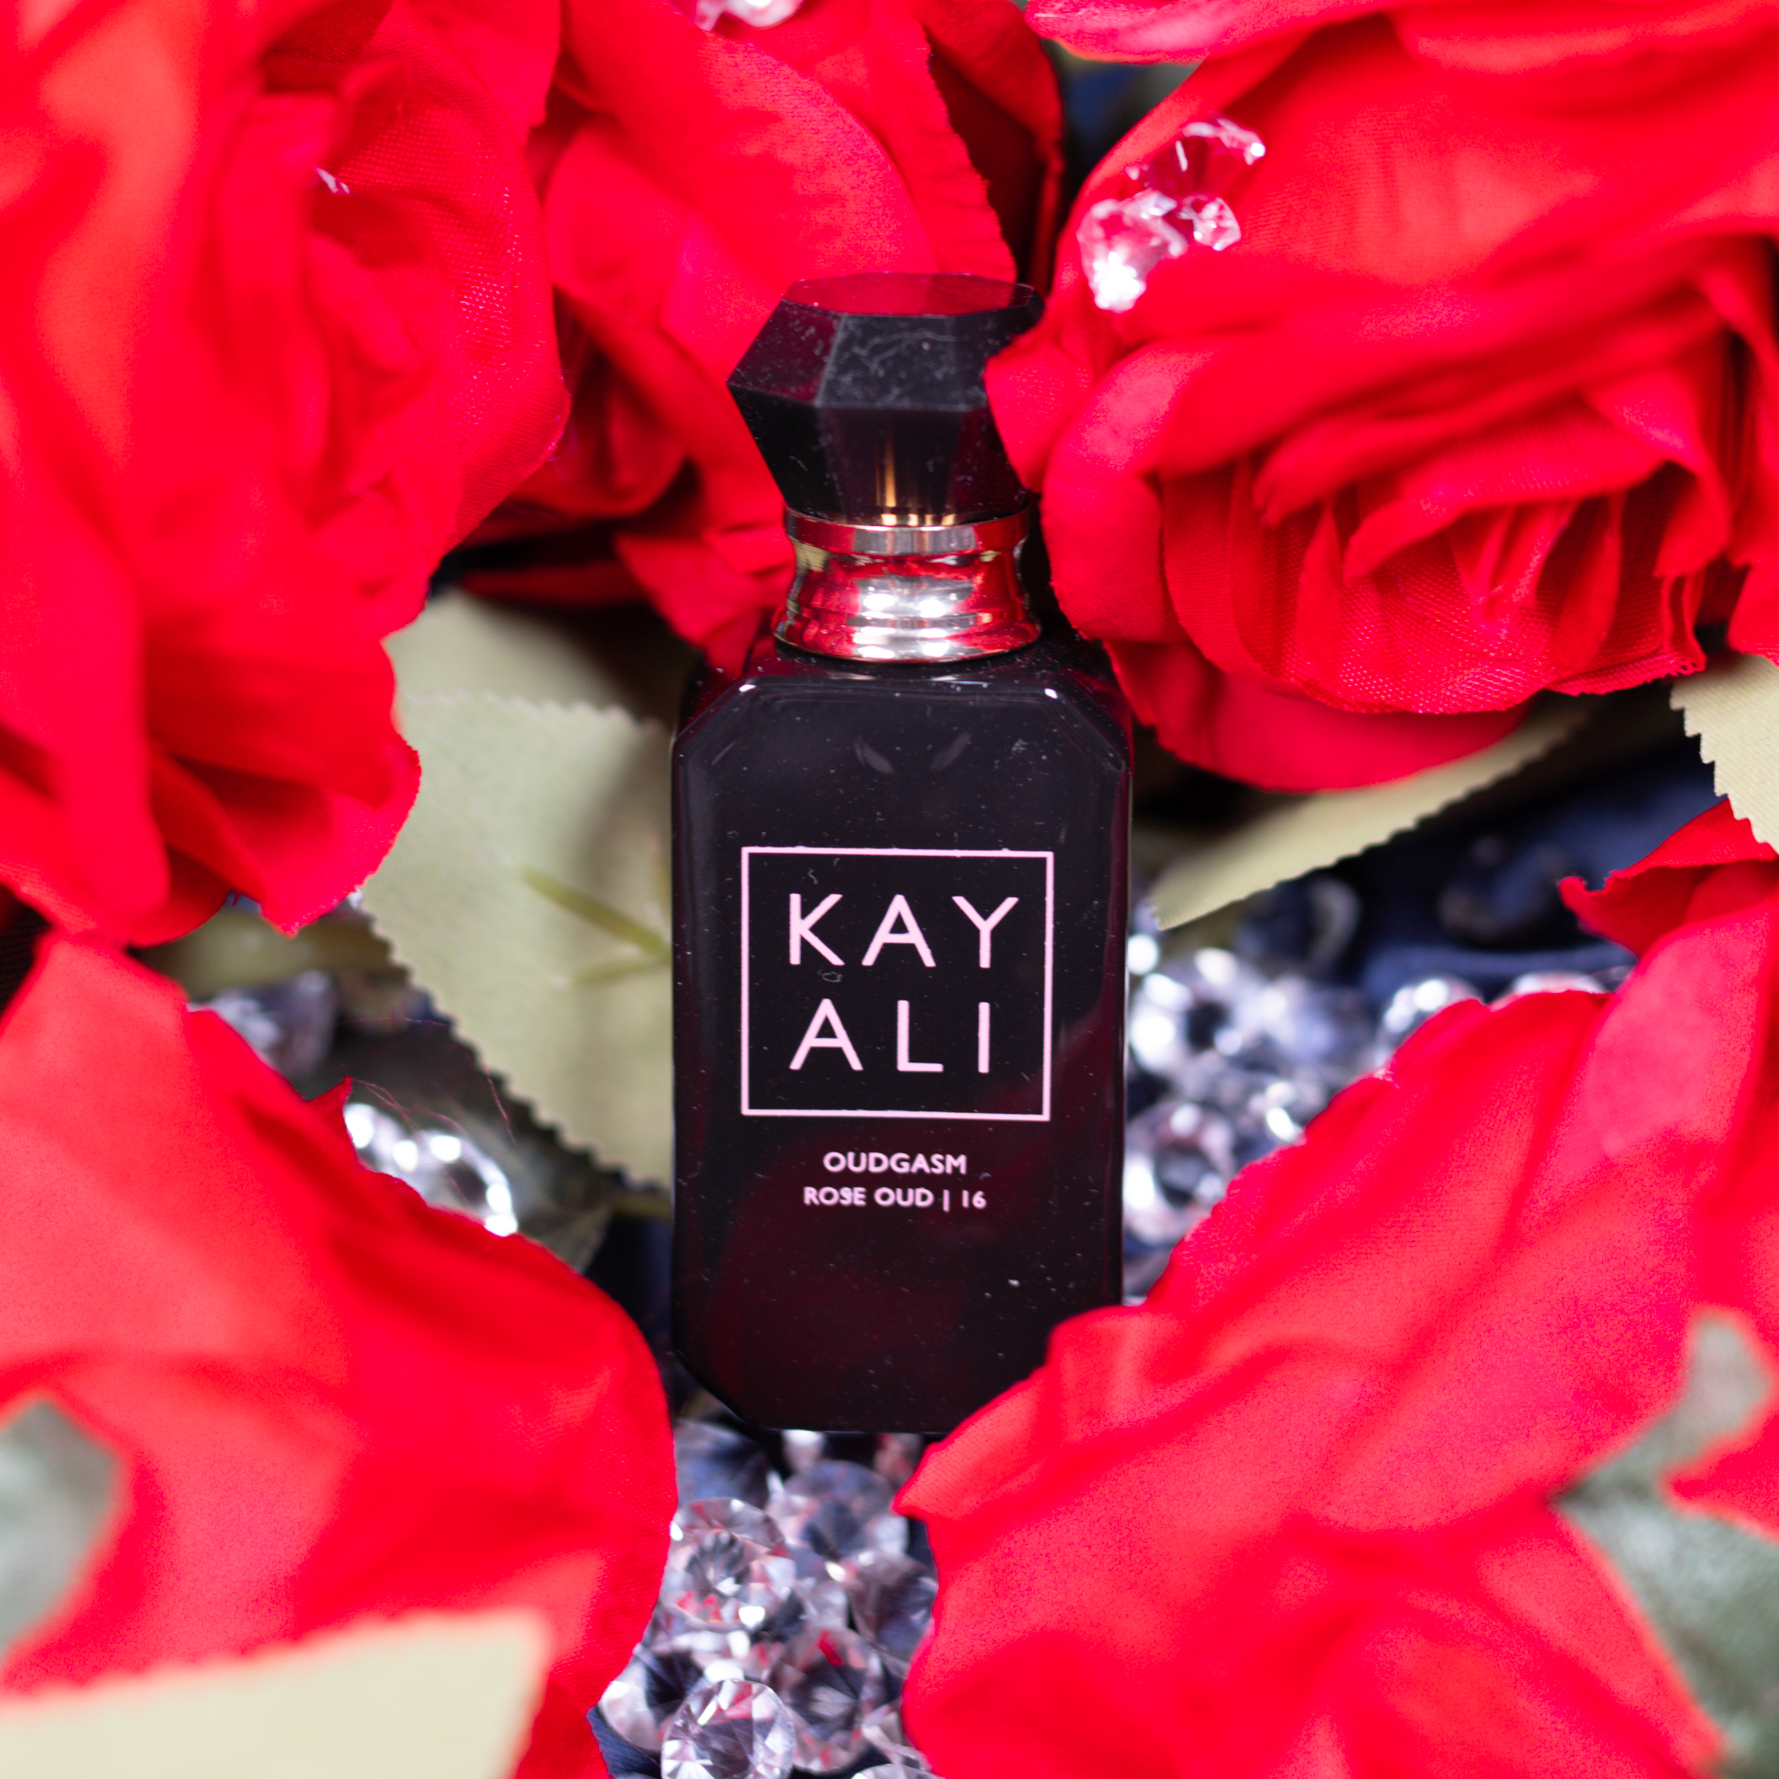 Kayali Oudgasm Collection: Rose Oud 16